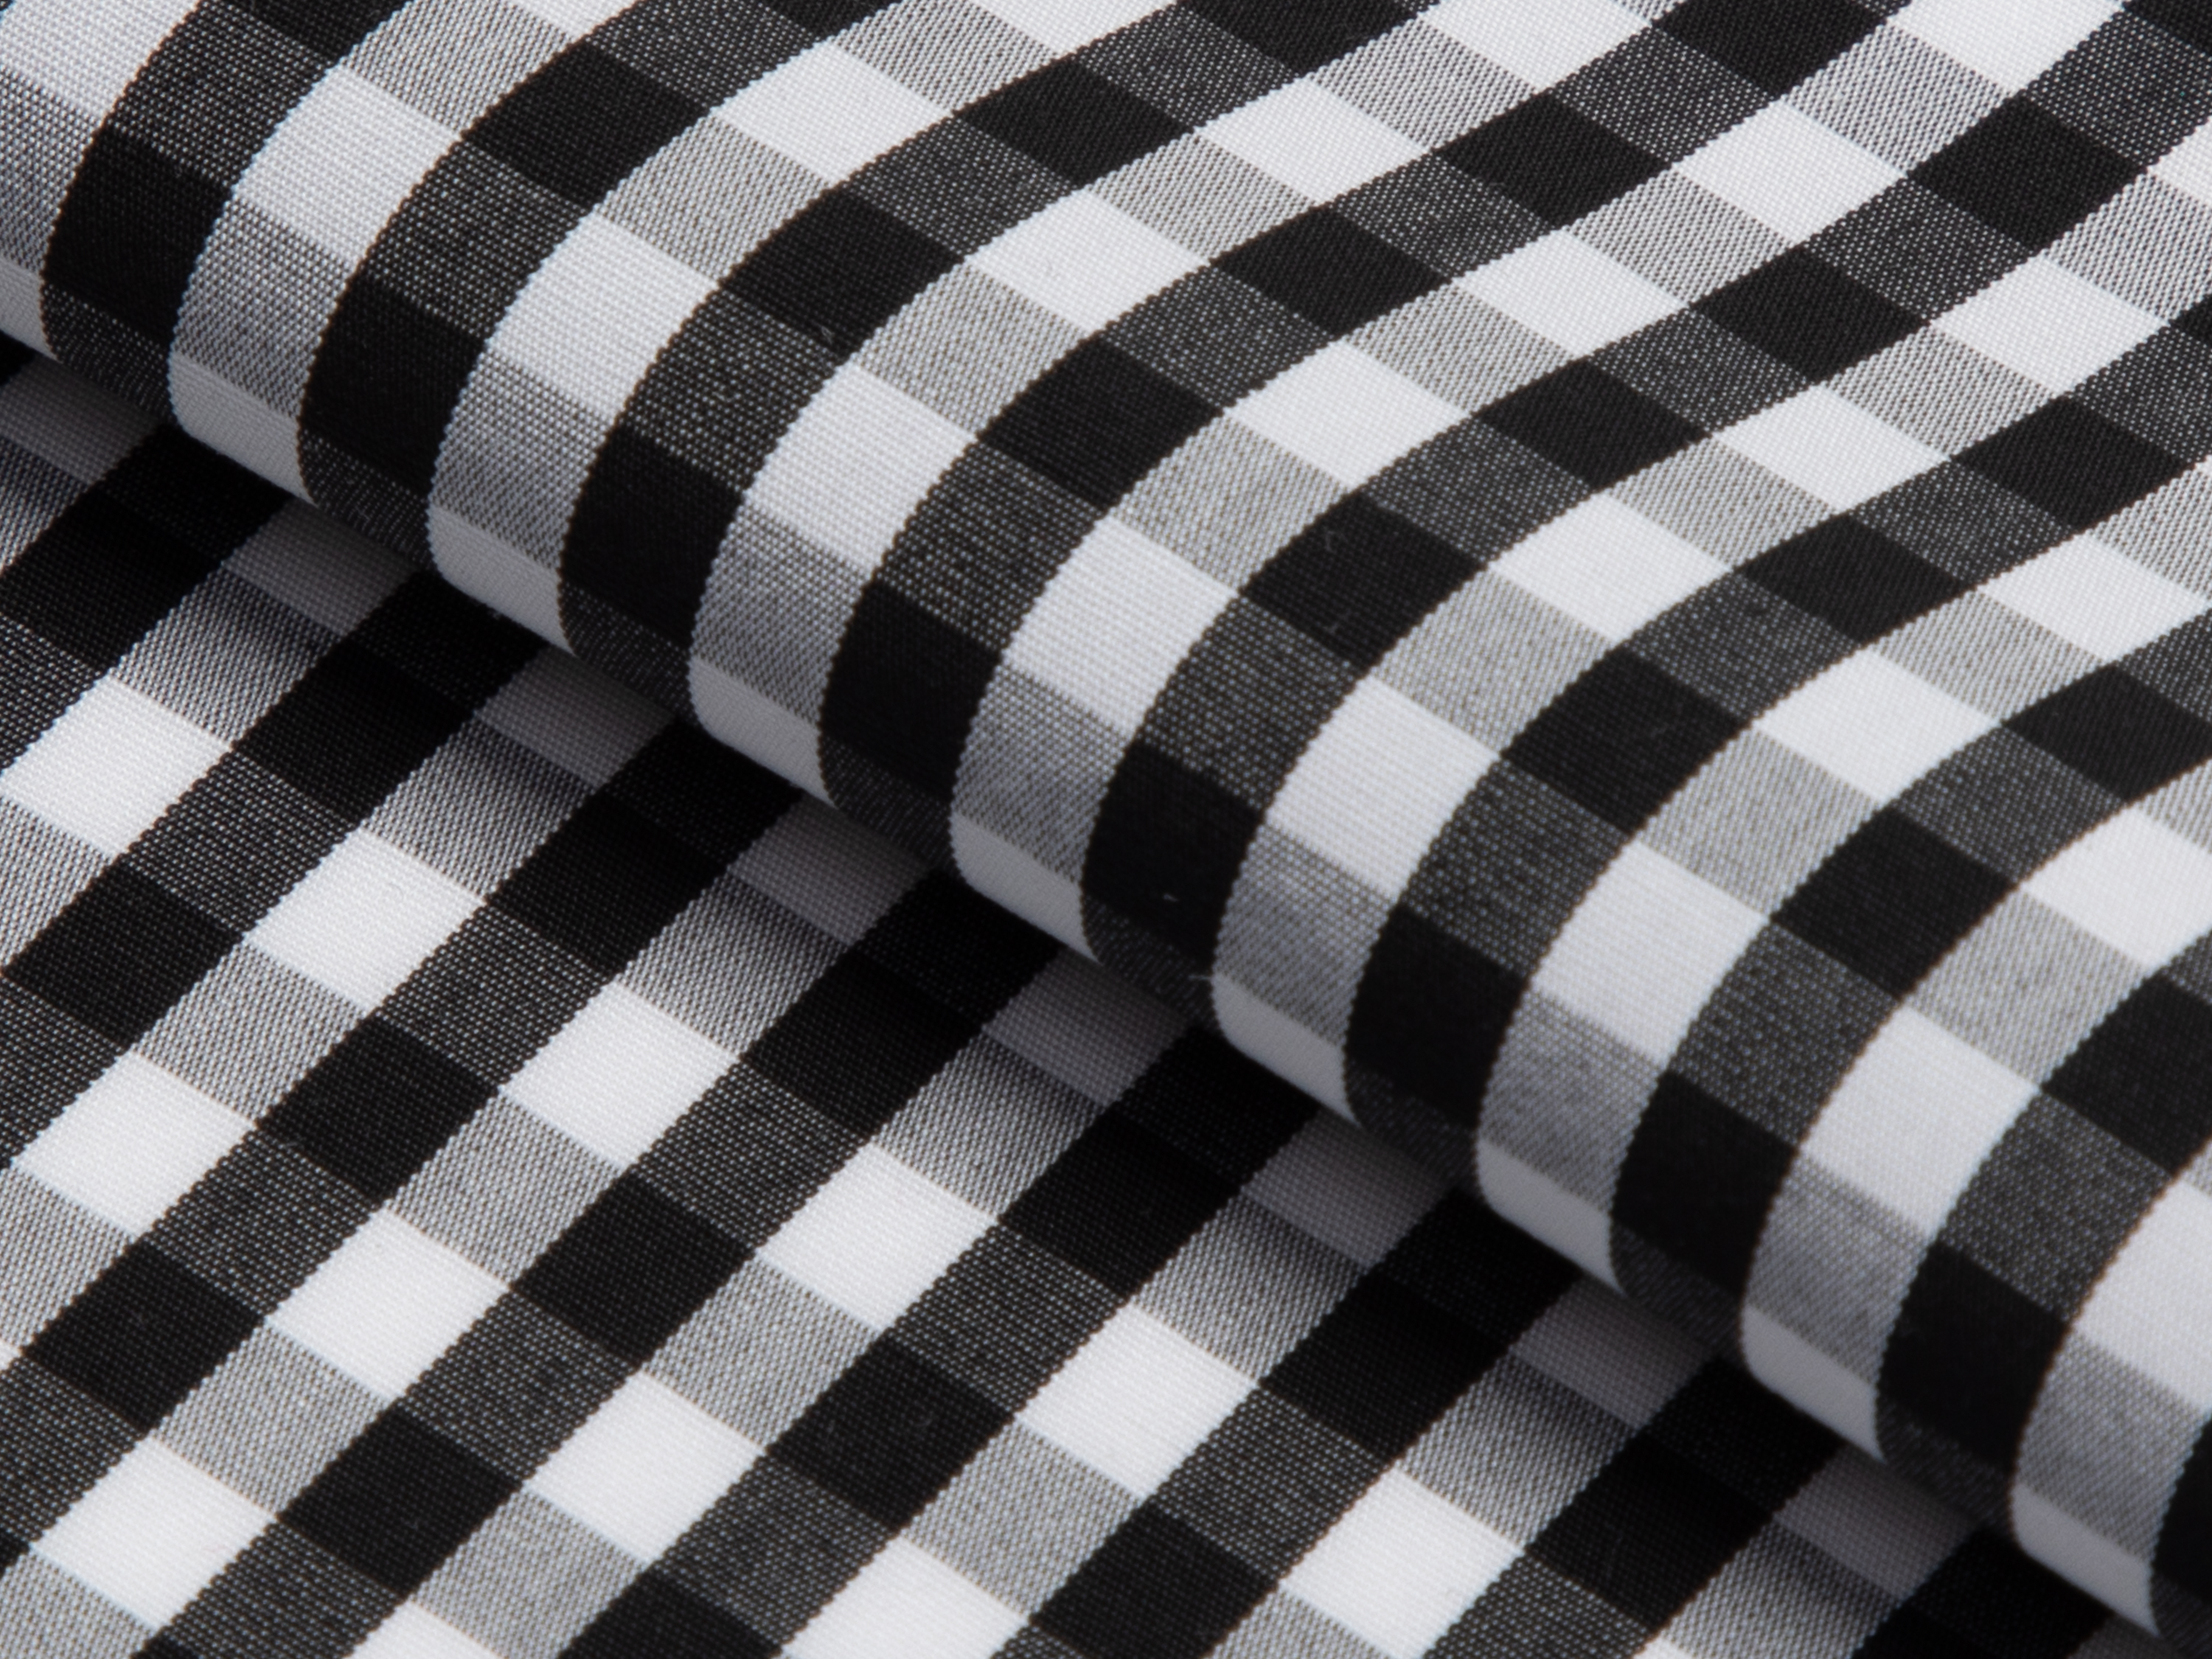 Buy tailor made shirts online - GINGHAM LUXURY  - Gingham Black